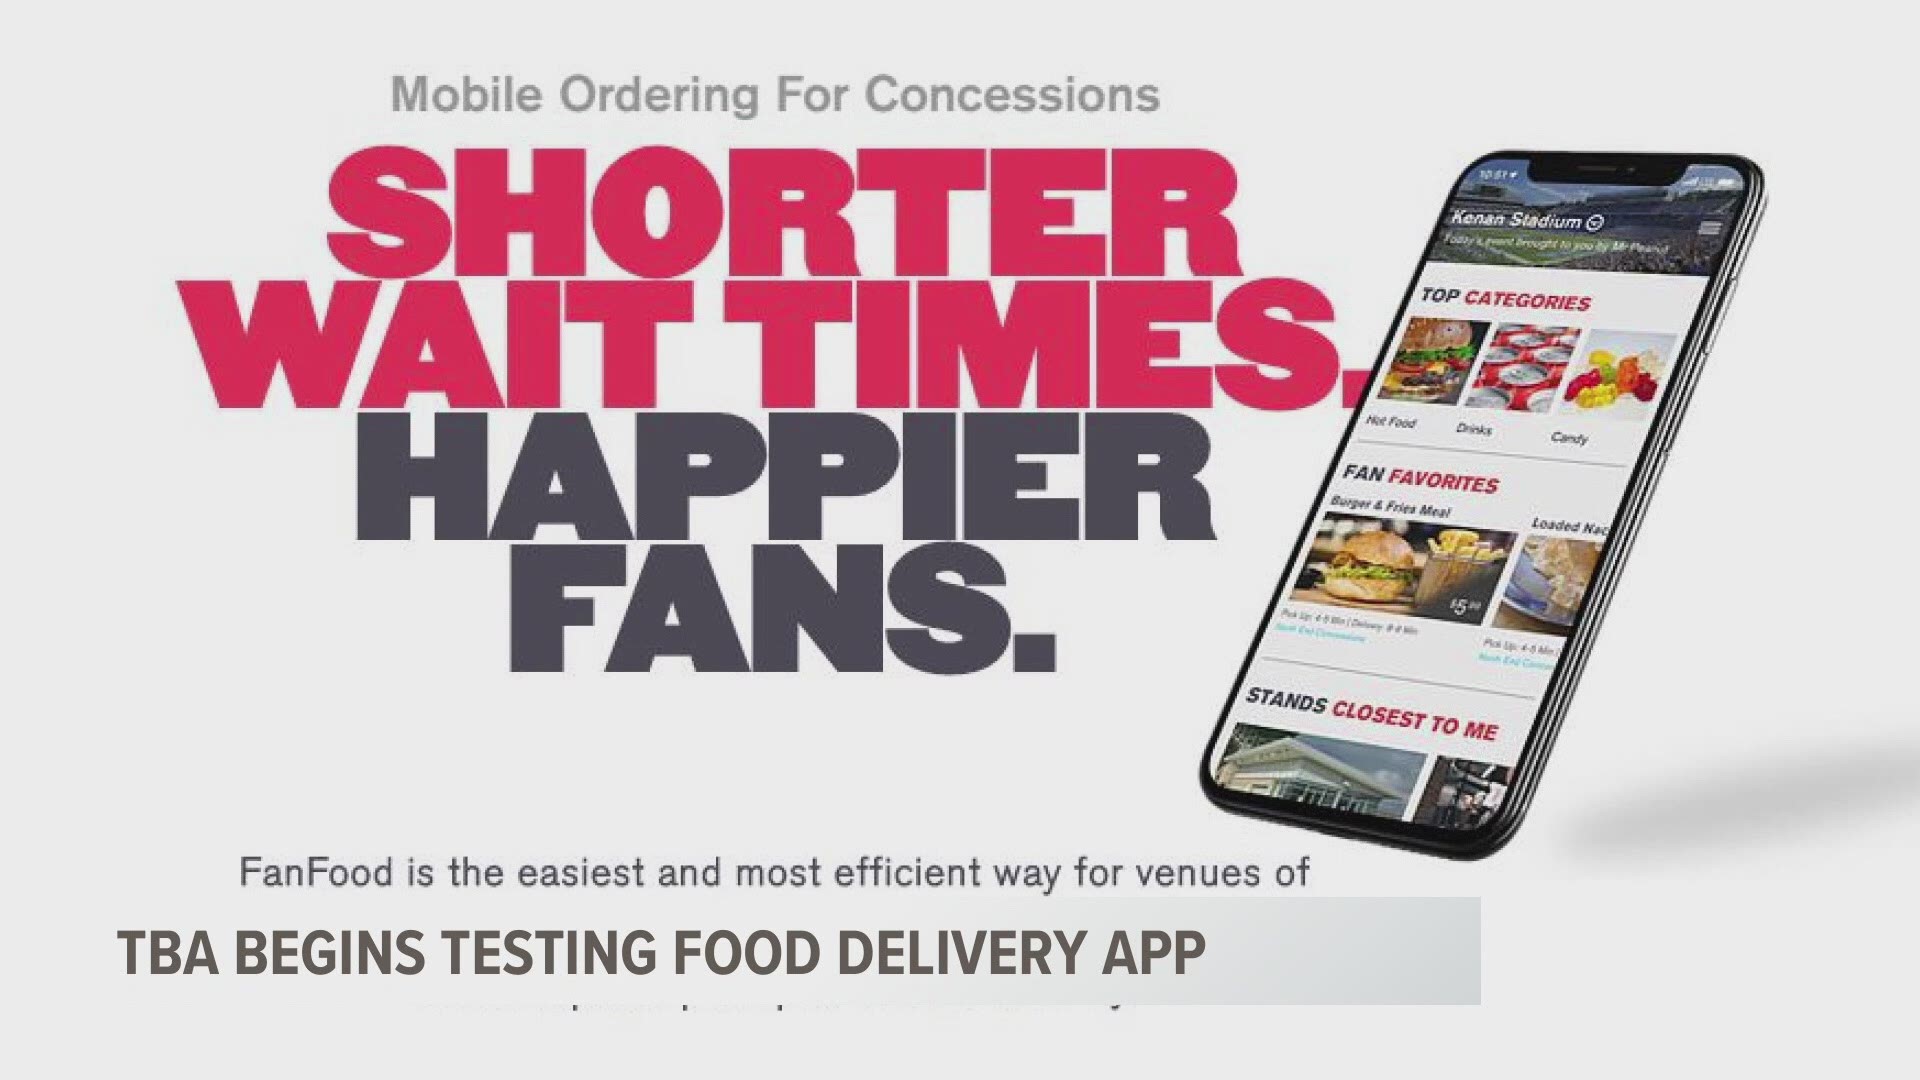 The app allows fans in certain sections to order food and have it delivered directly to their seats.